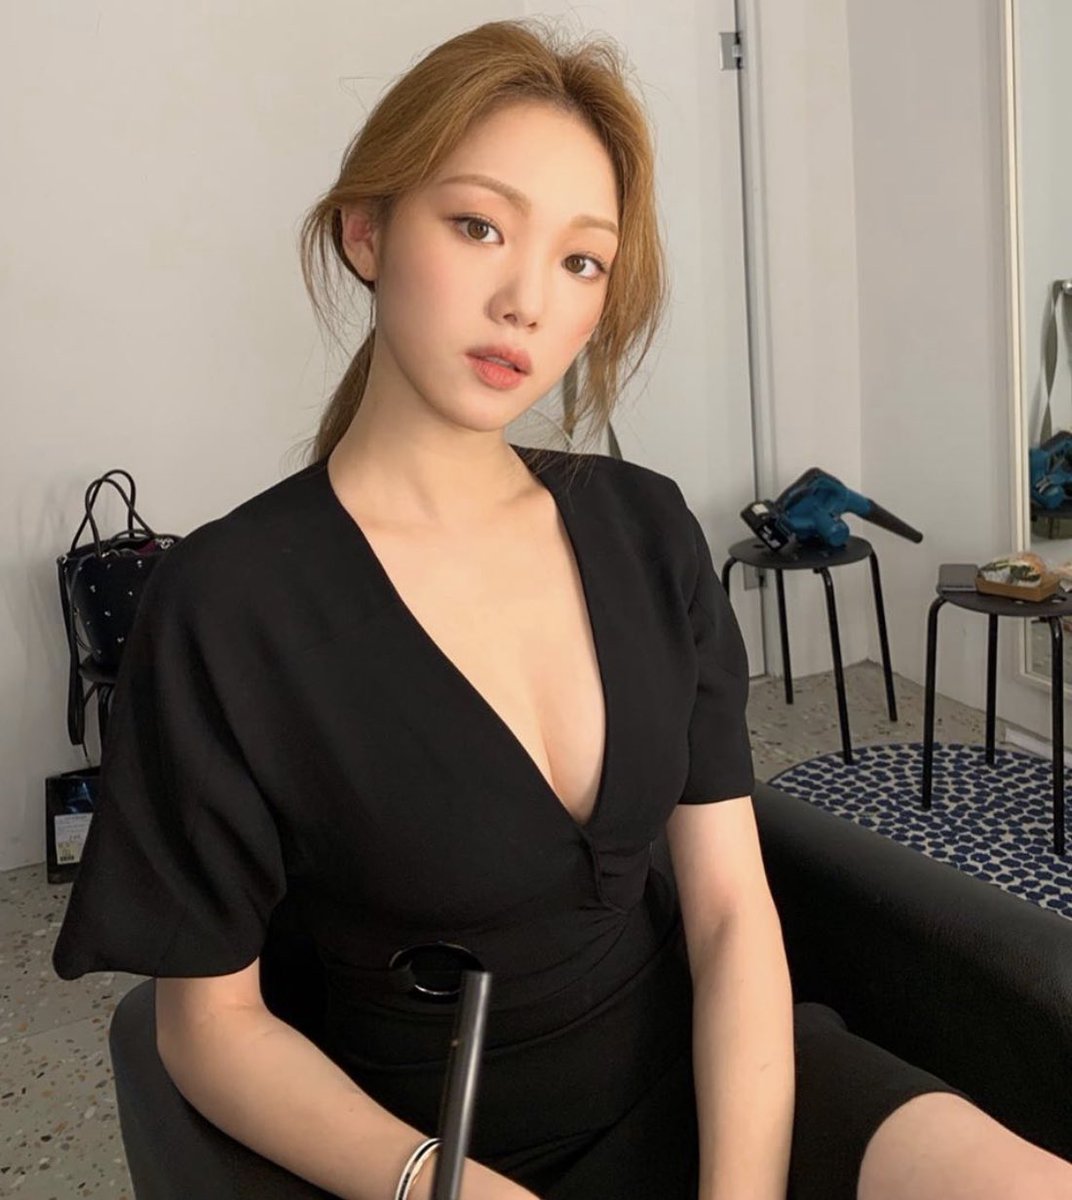 Who is Lee Sung Kyung?-Appreciation thread of her and her talentsLee Sung Kyung (이성경) is a South Korean model, actress and singer.She is kind, cheerful, grateful, loving. She has too many talents and virtues.She is also known for her incredible beautyOccupations: